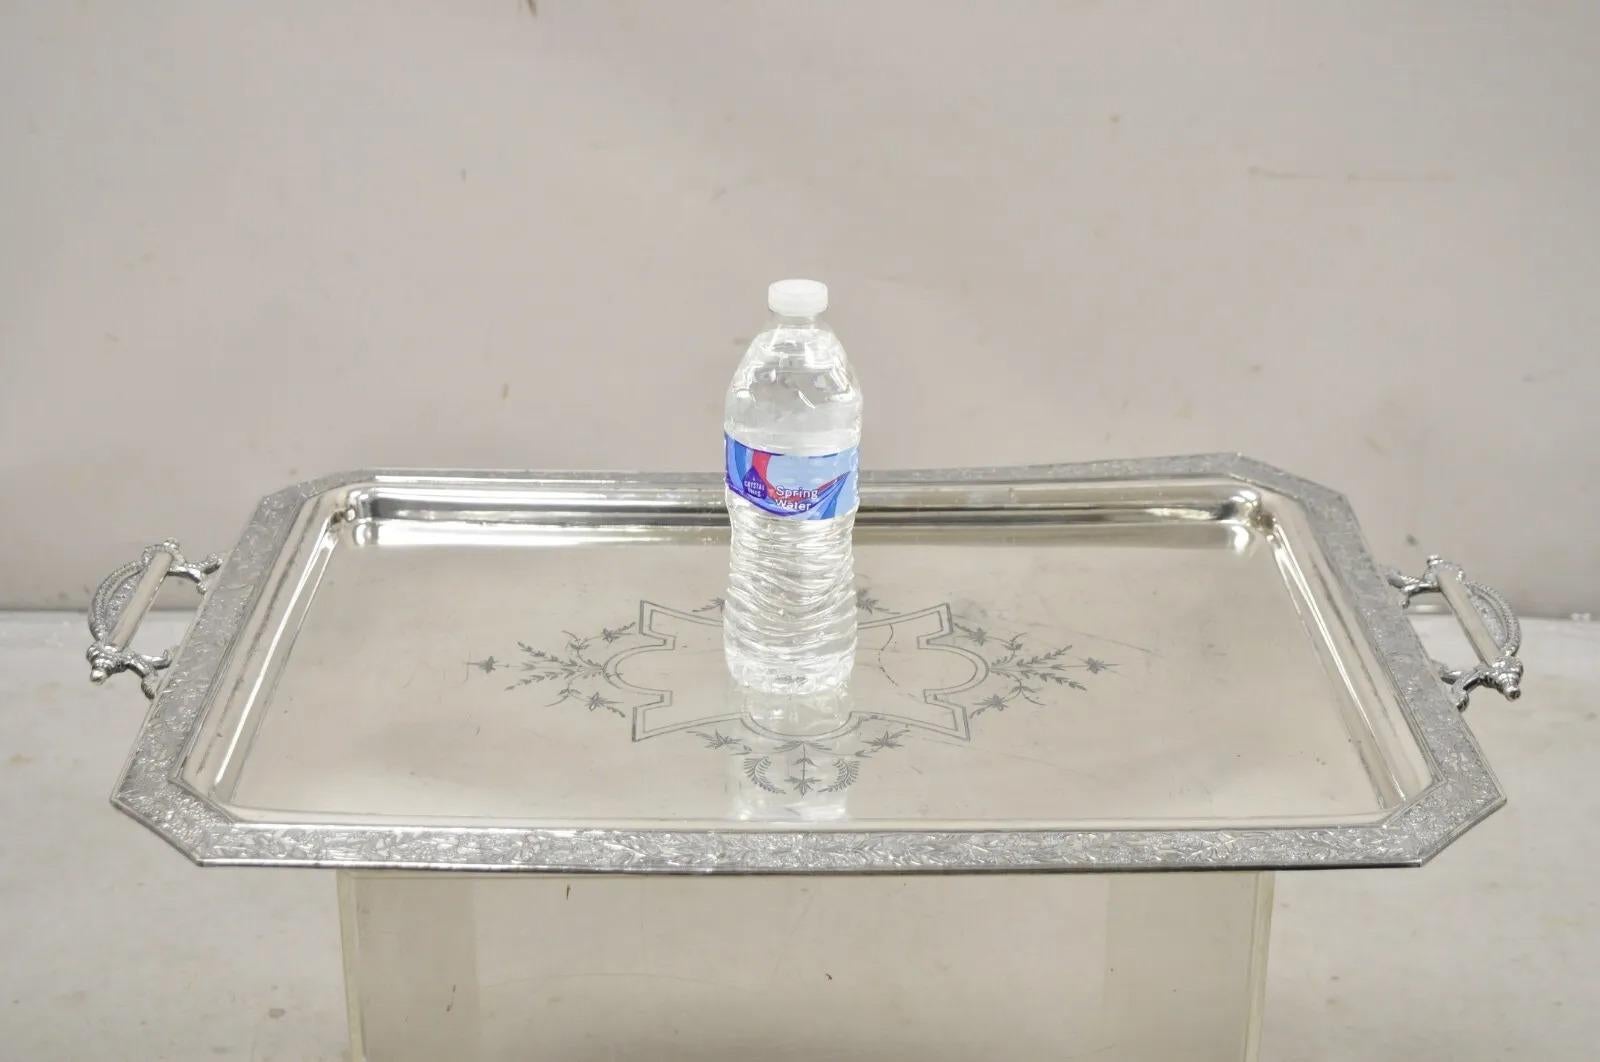 Antique Wilcox Victorian Aesthetic Movement Silver Plated Serving Platter Tray. Circa Early 20th Century. Measurements: 1.5